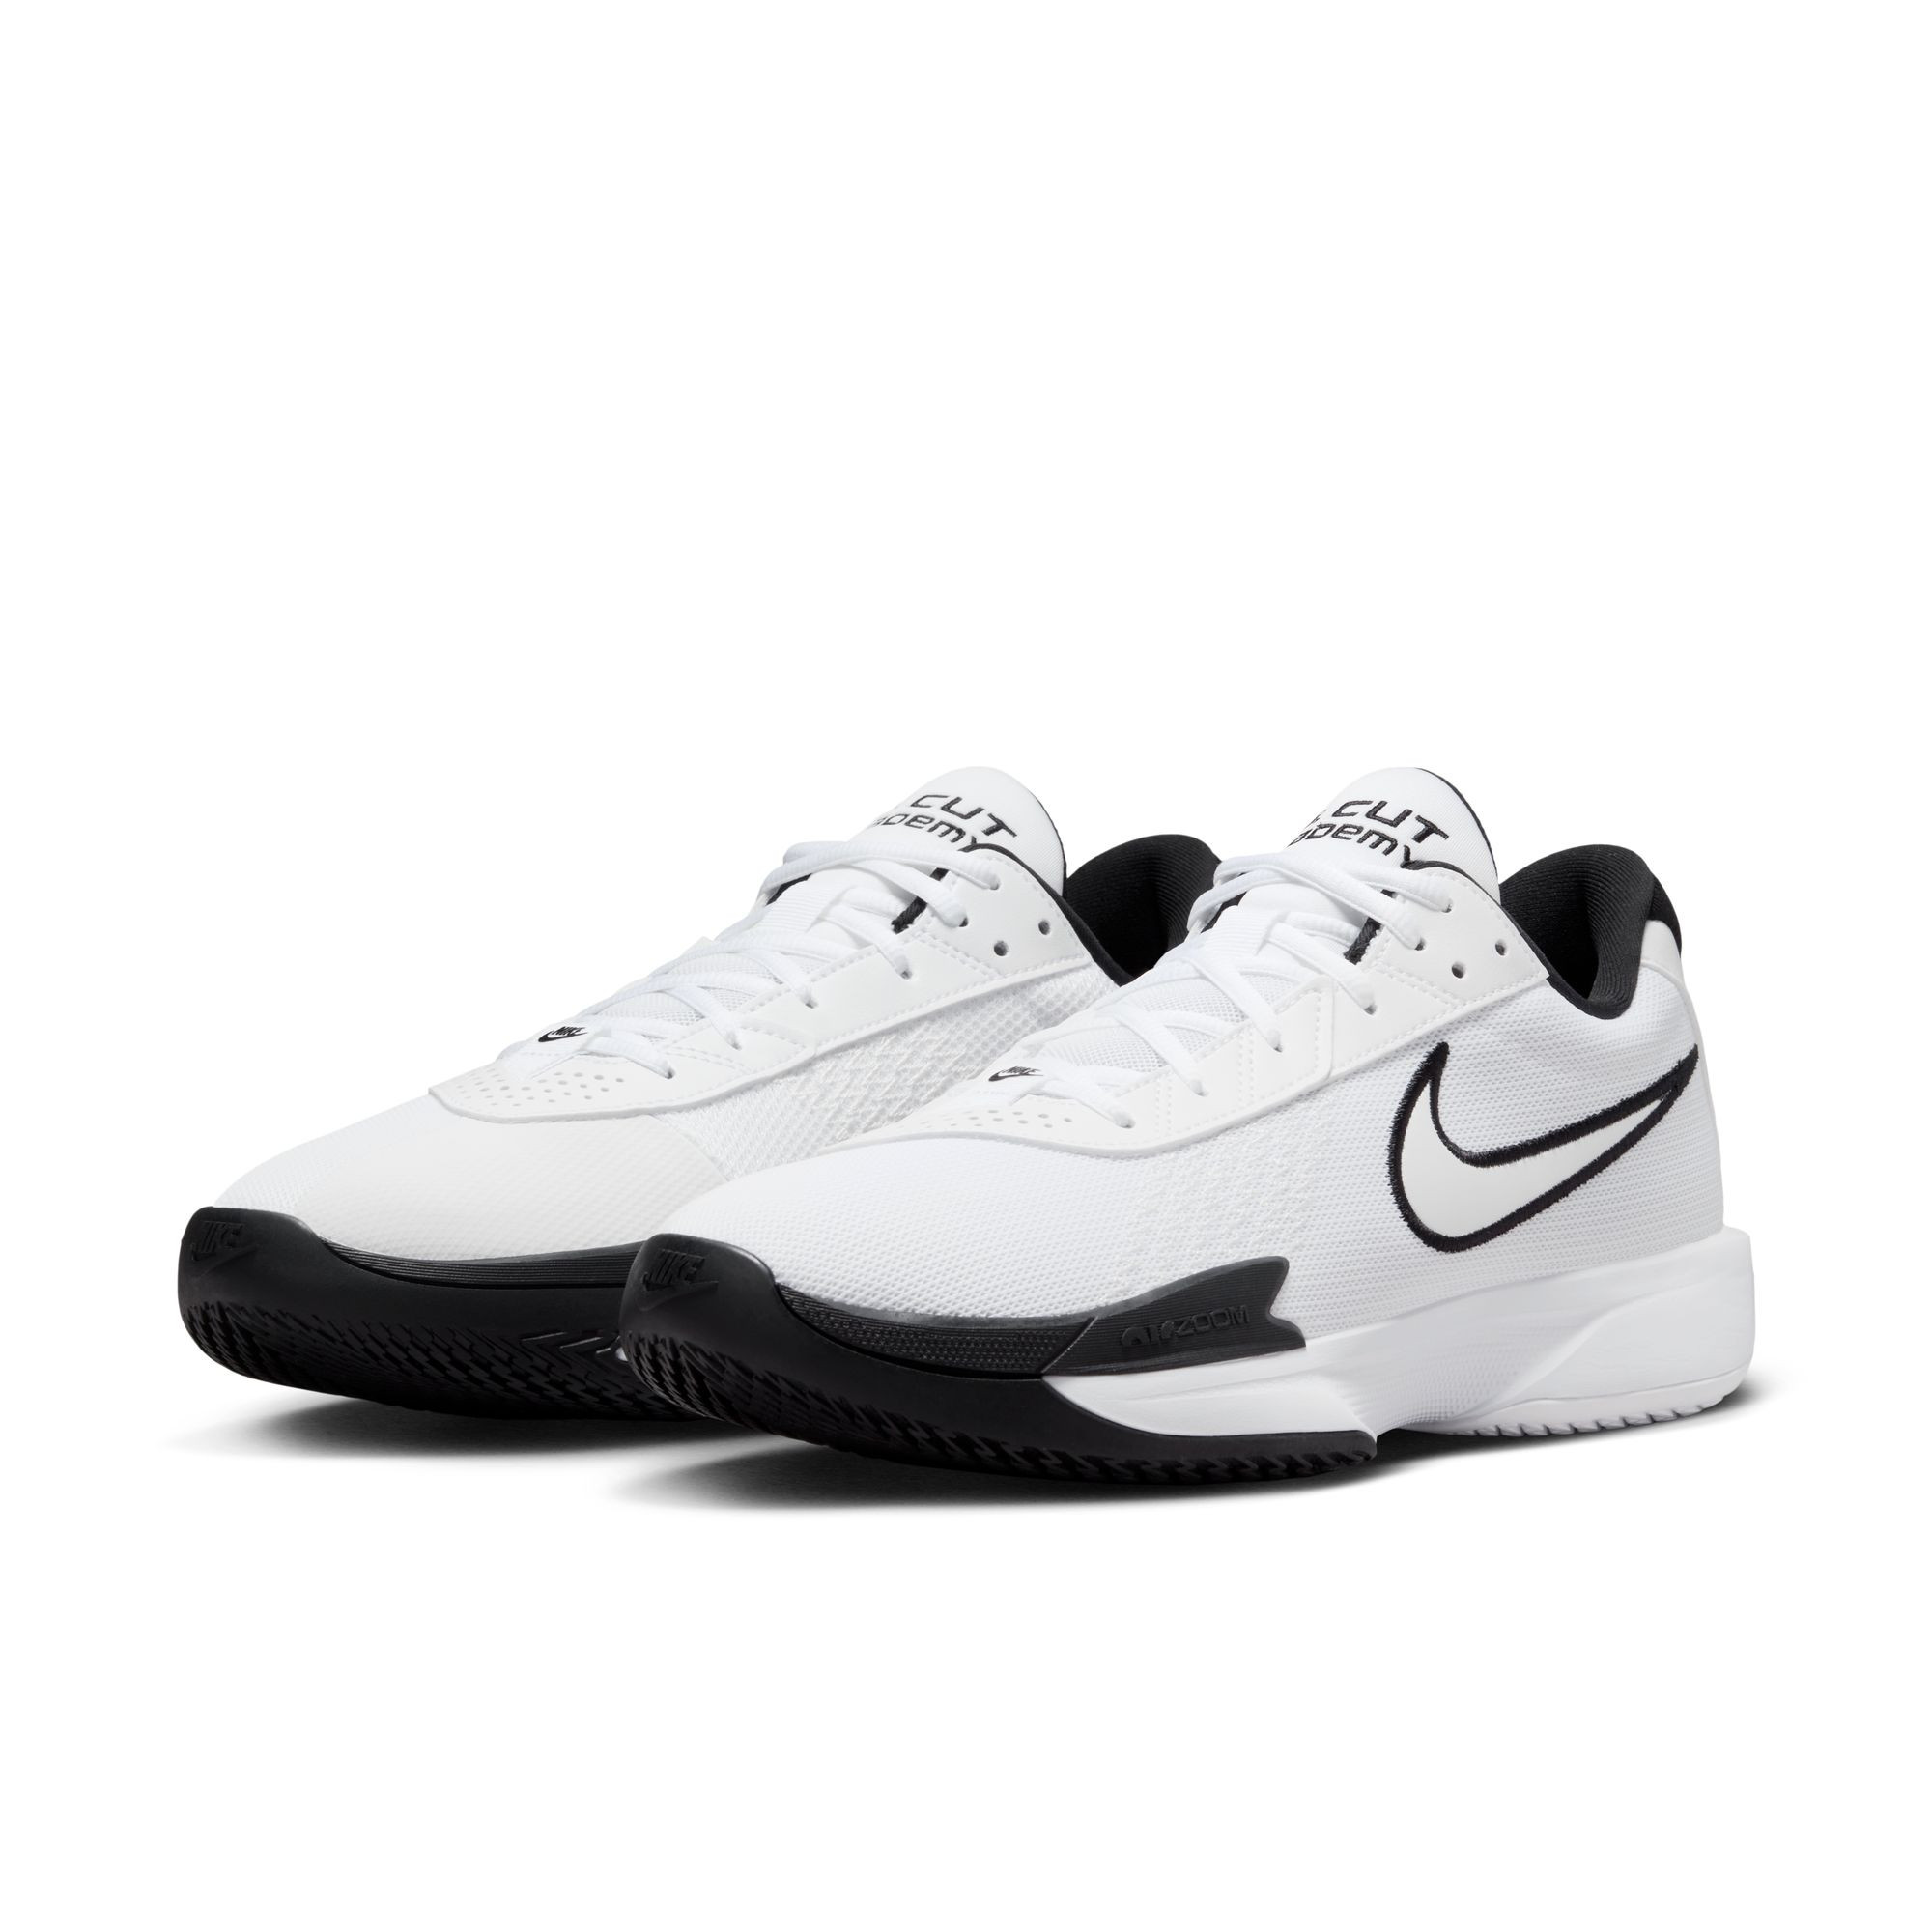 Cut Academy Men's Basketball Shoes - White/Black-Summit White-Anthracite - FB2599-100